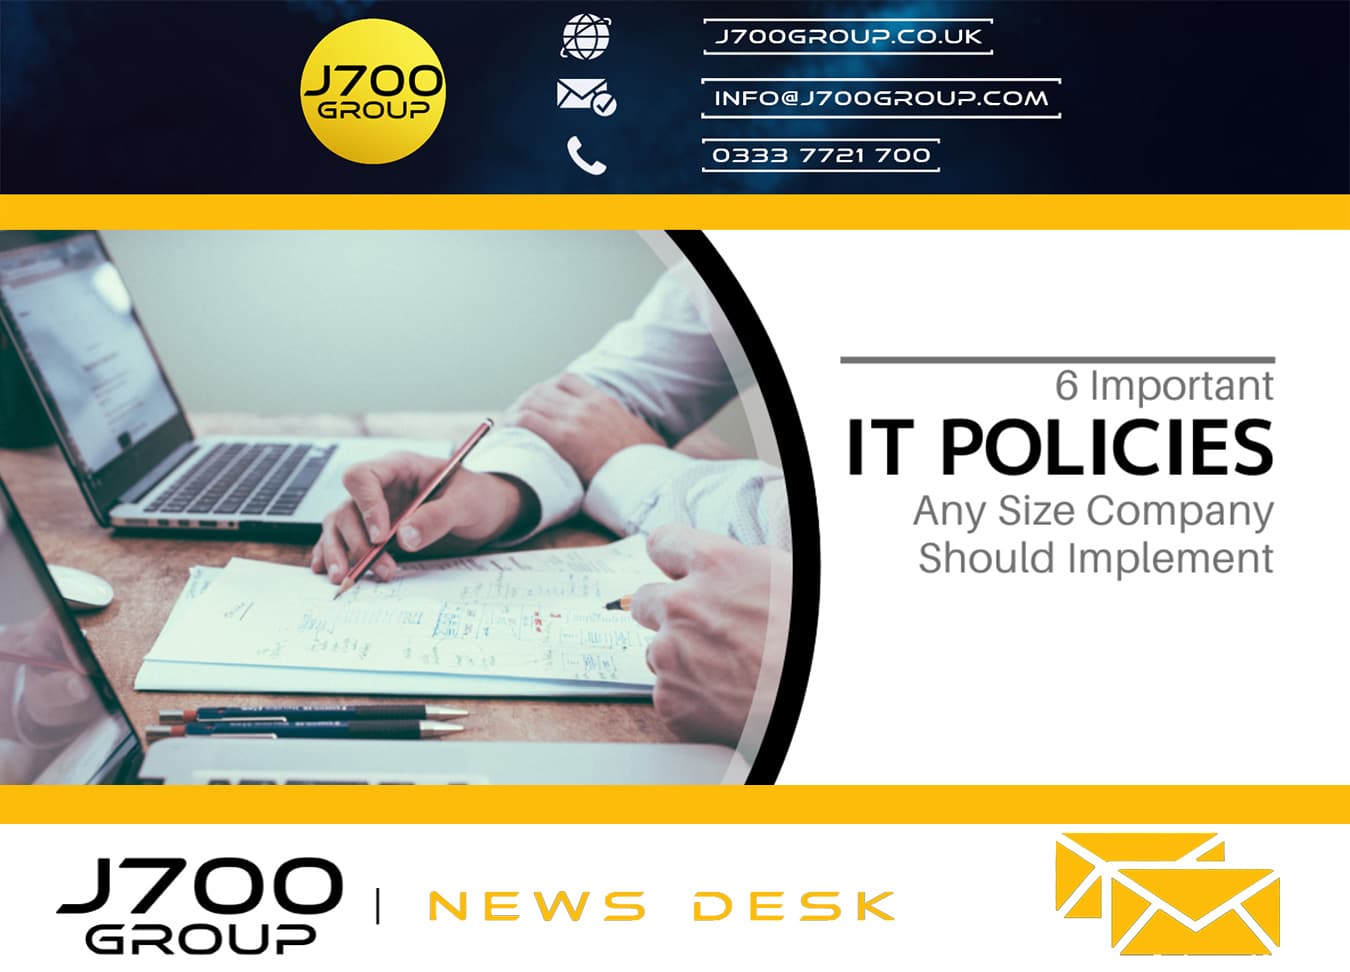 6 Important IT Policies Any Size Business Should Implement